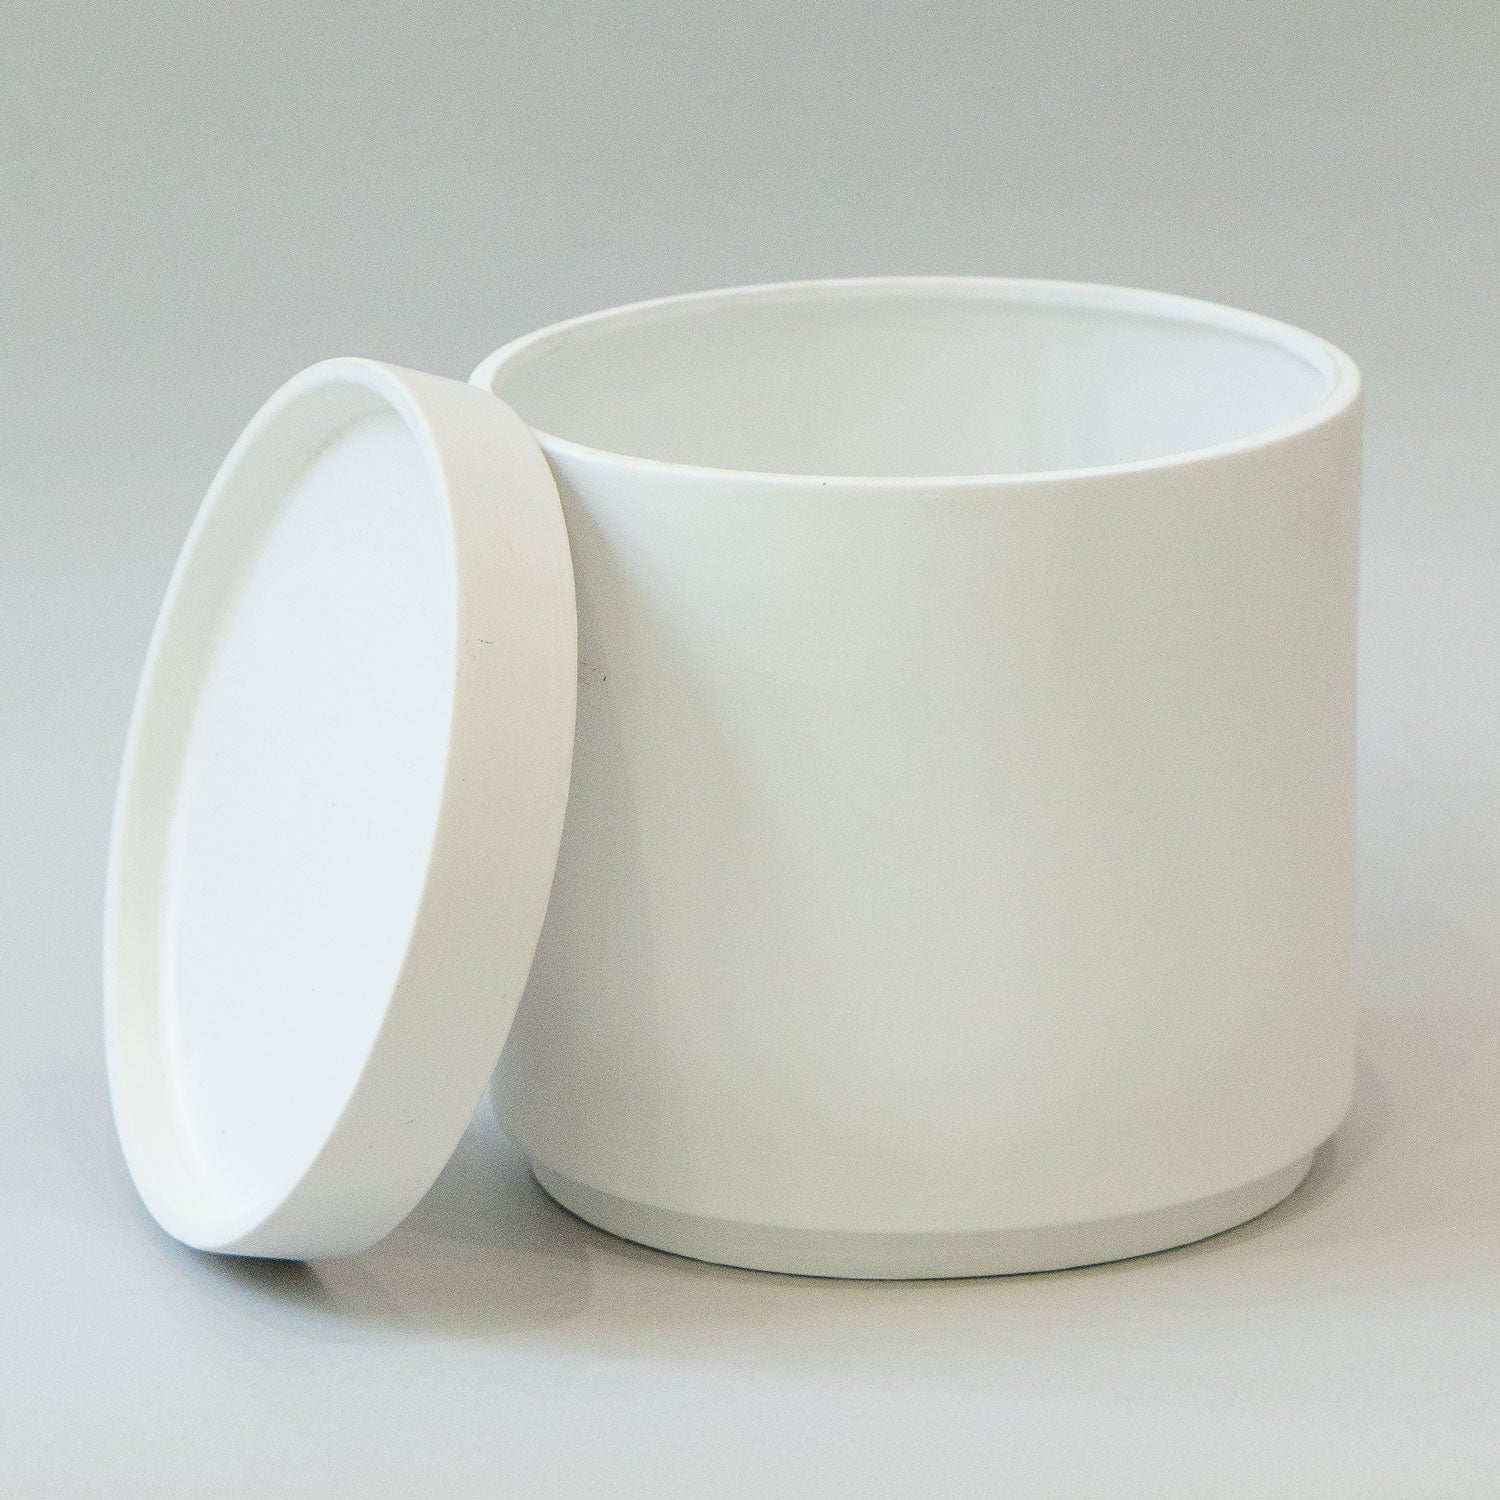 4.5” Ceramic Pot with saucer small White - Pots & Planters for Delivery